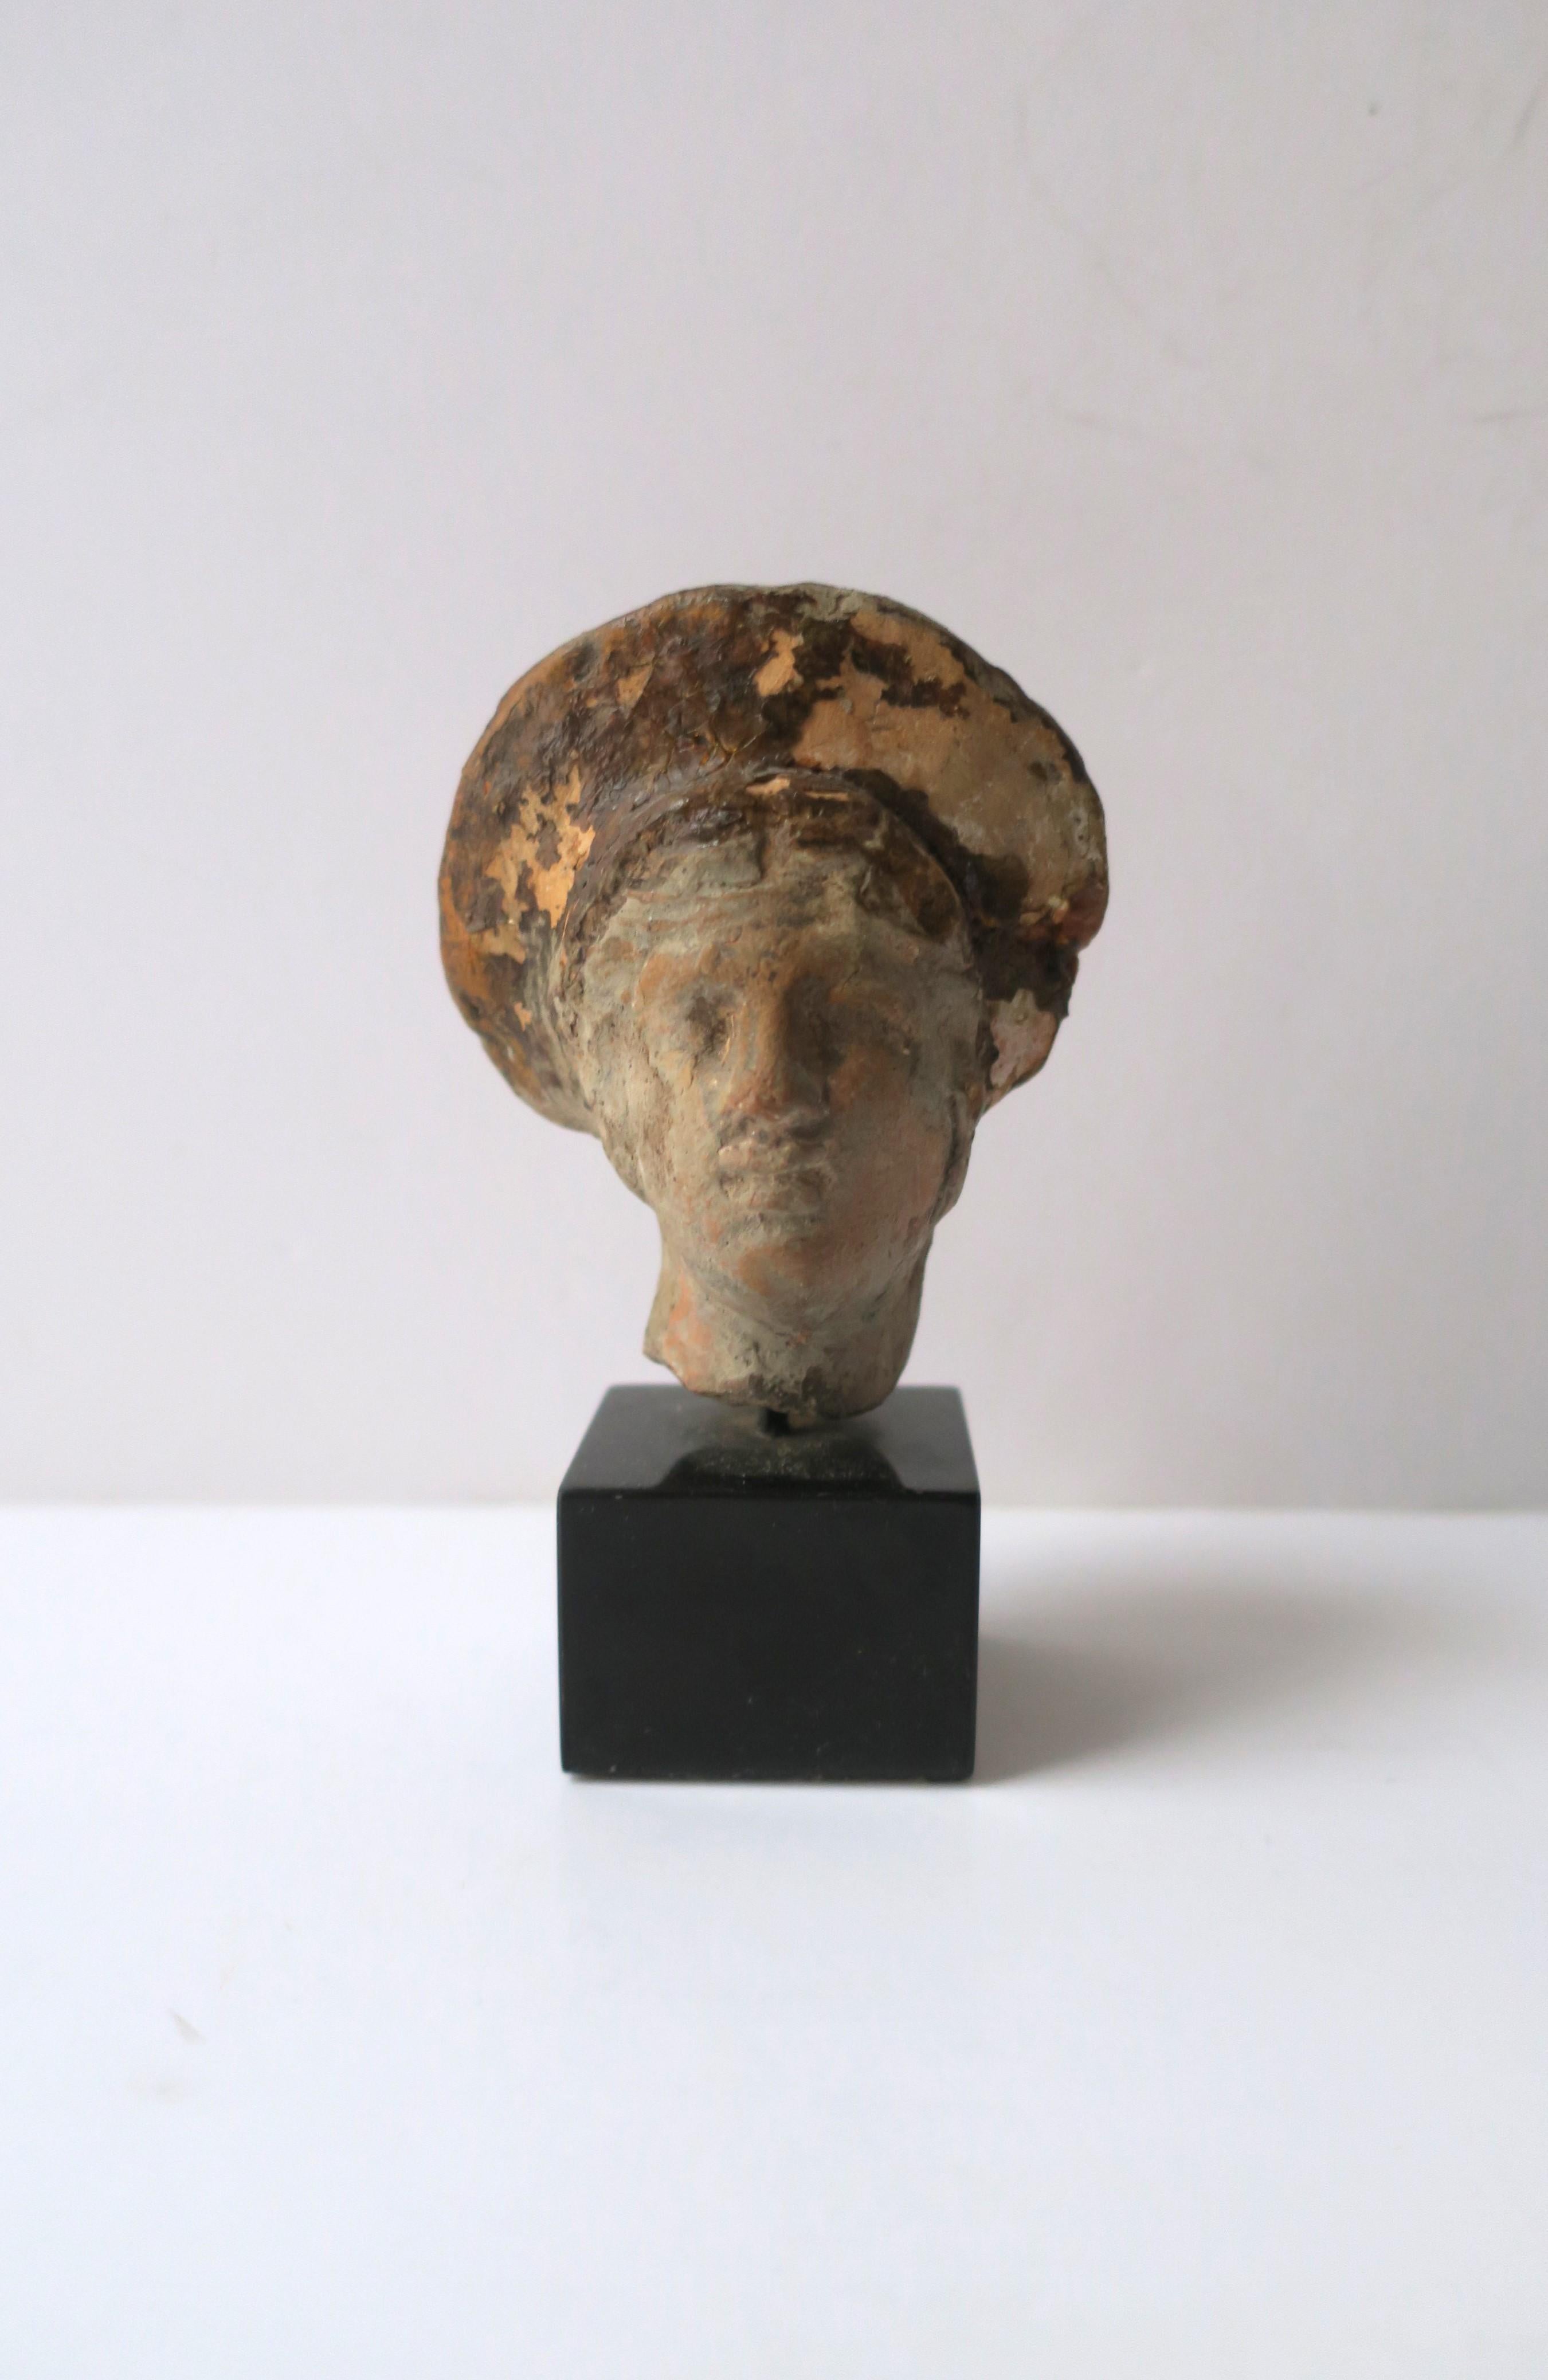 An ancient hand-crafted terracotta head bust sculpture of a Greek Goddess on a black marble base, Greece. Exact date unknow. Artist/Sculptor unknown. Piece may work well on an end table, library, shelf, etc.

Dimensions: 2.25